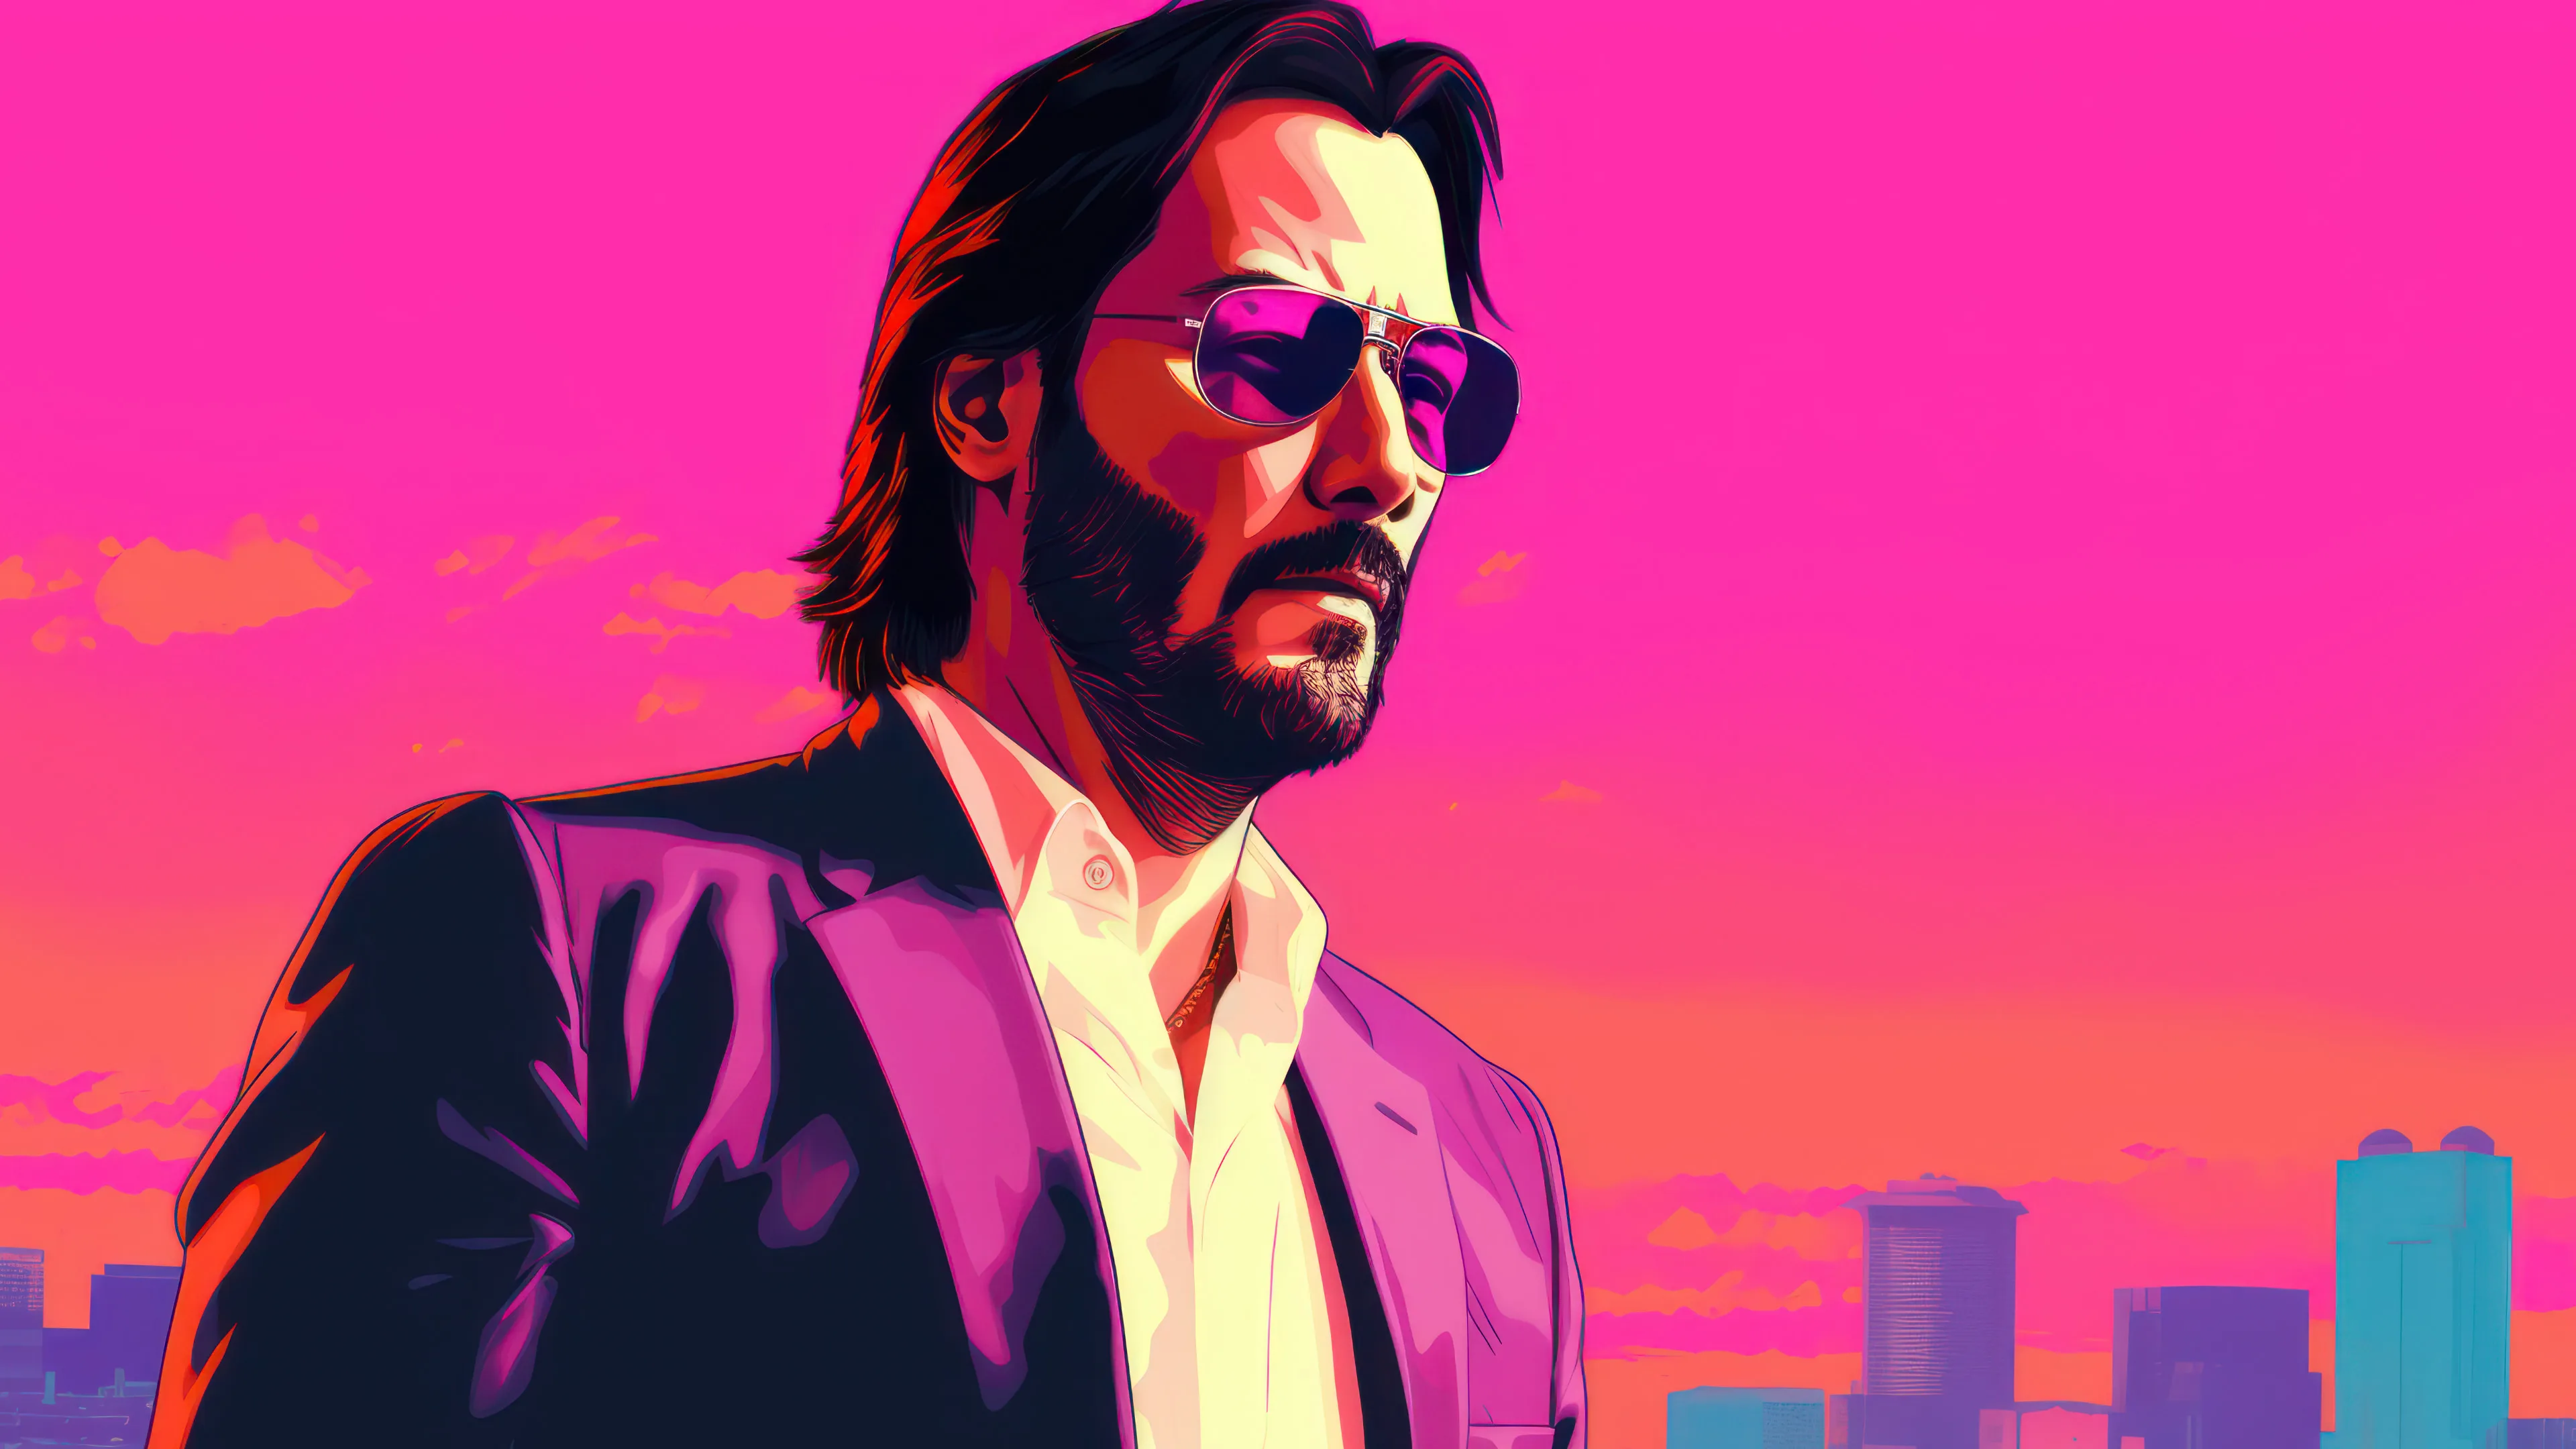 Experience the ultimate action-packed virtual reality with this AI generated 4K wallpaper featuring the legendary Keanu Reeves in the iconic GTA Vice City setting. This celebrity gaming wallpaper is perfect for video game enthusiasts and fans of futuristic and action-packed virtual reality settings.